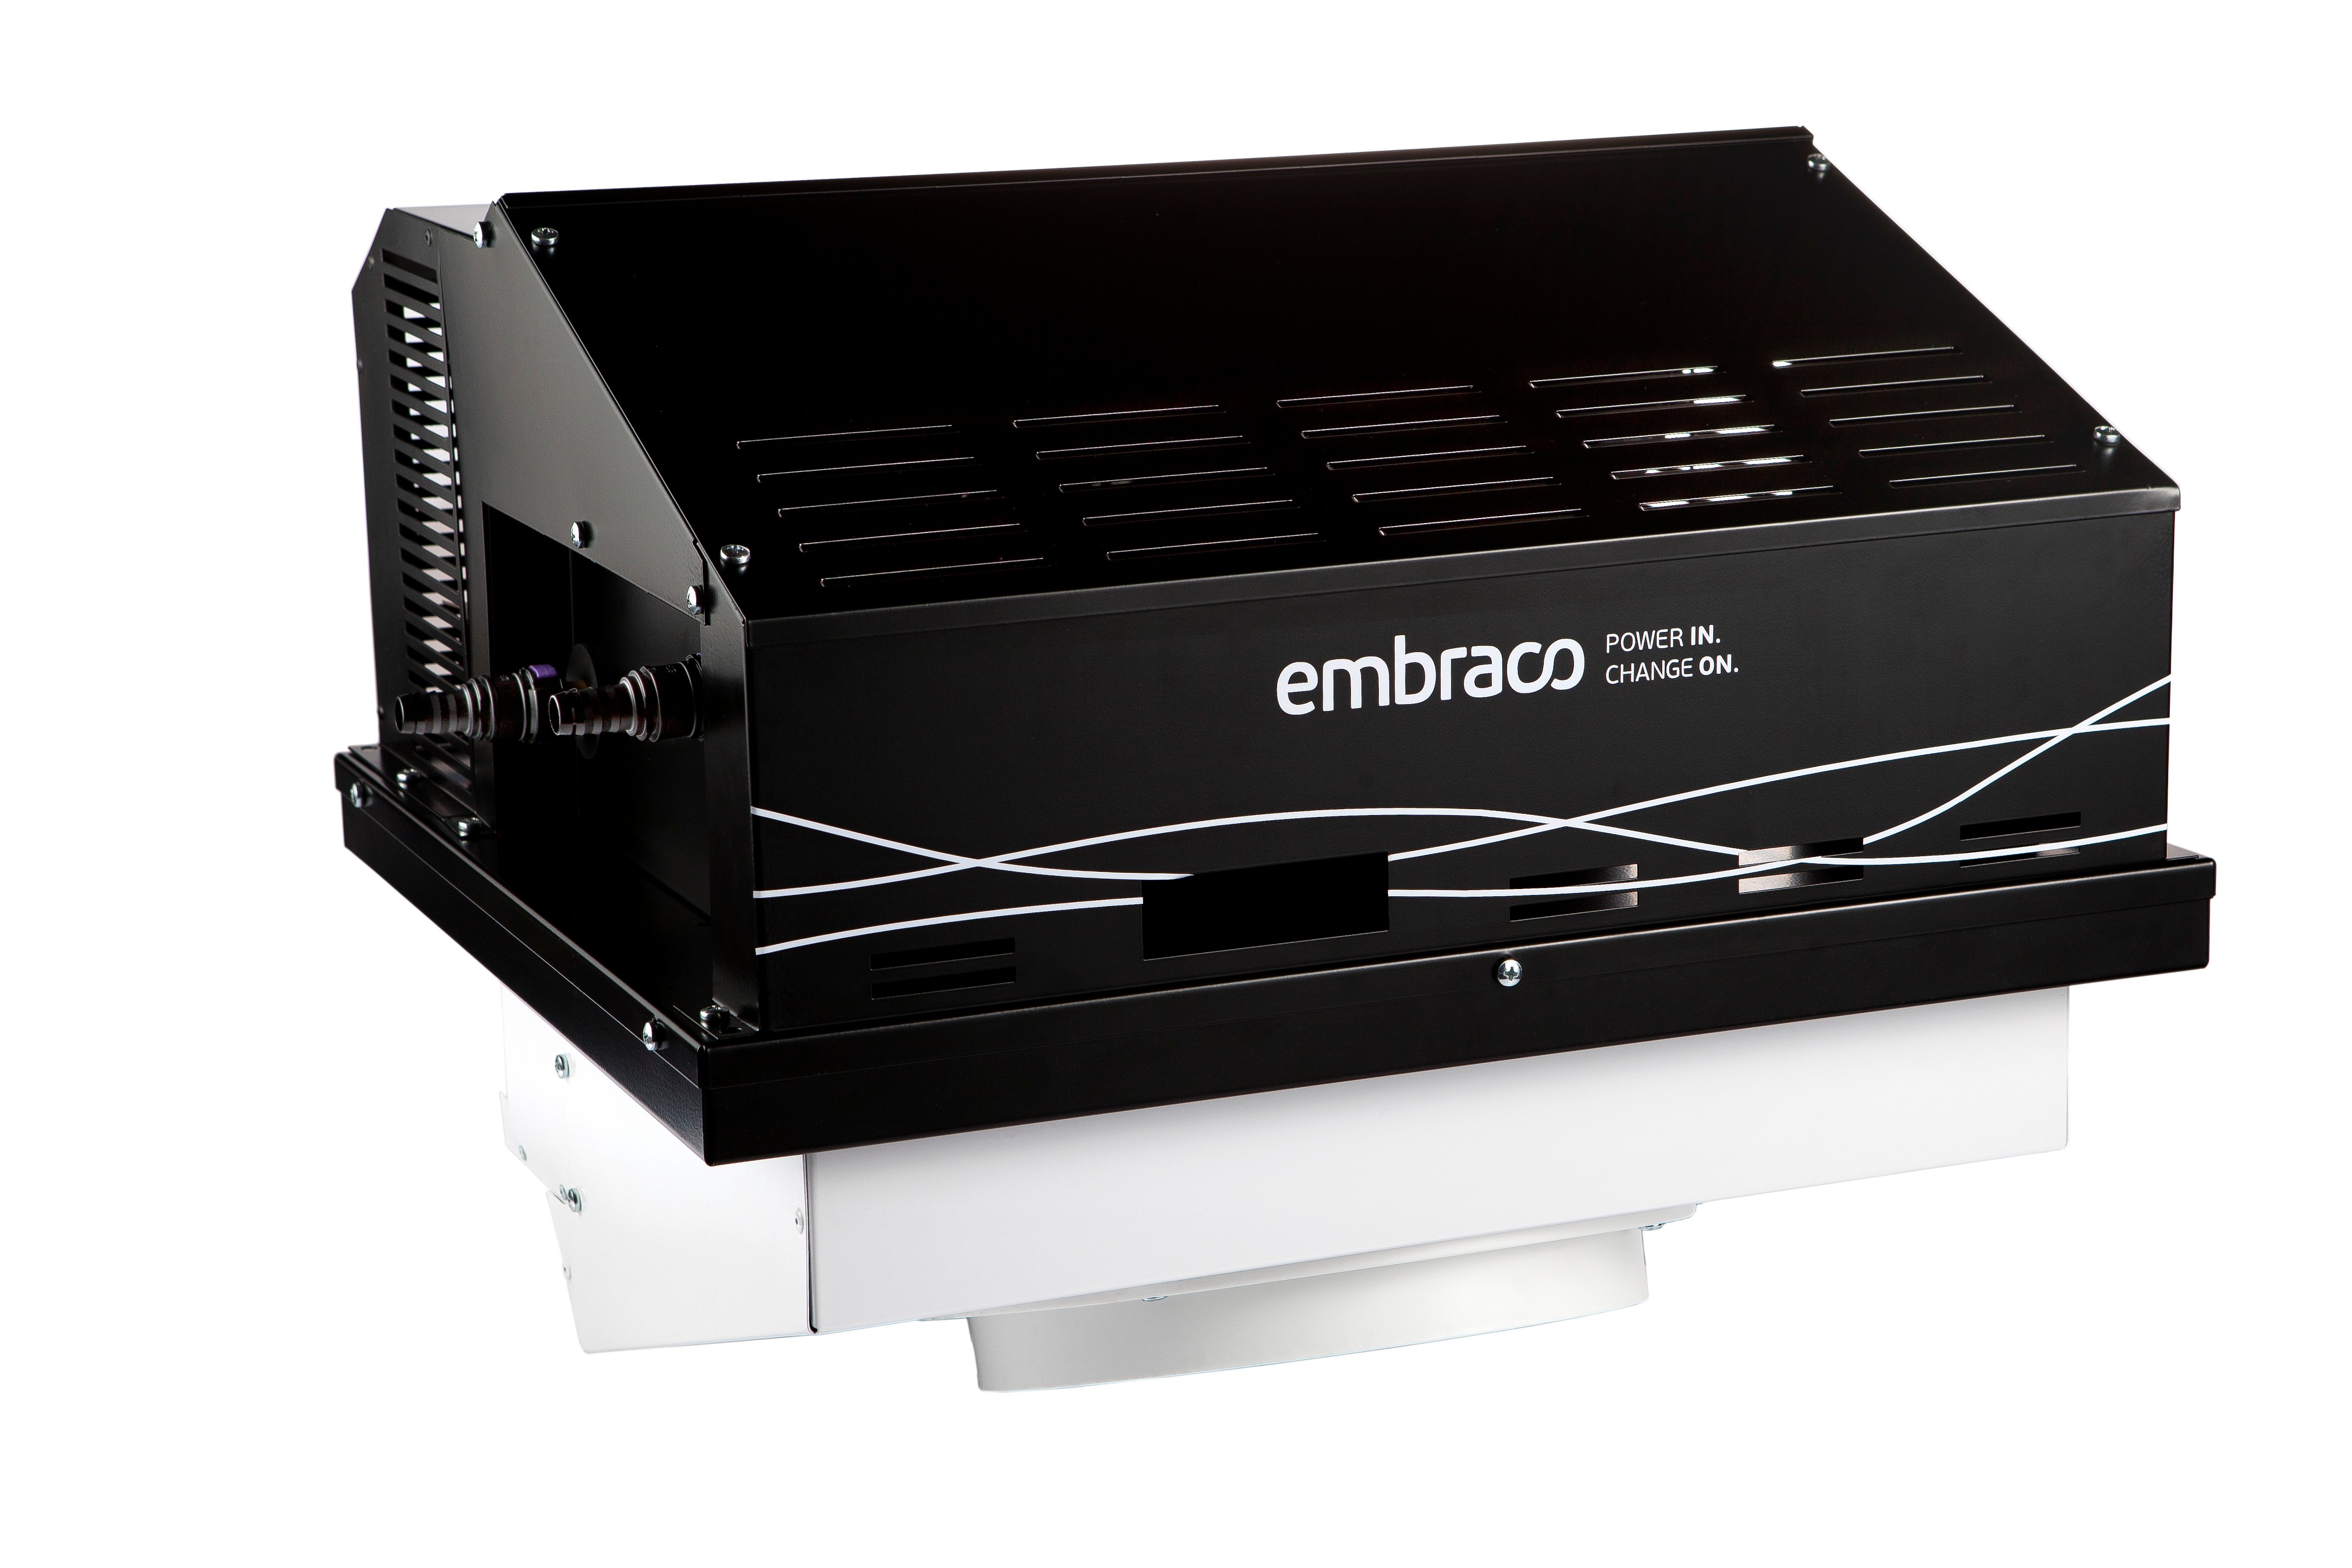 Plug n’ Cool: a R290 natural refrigerant solution by Embraco